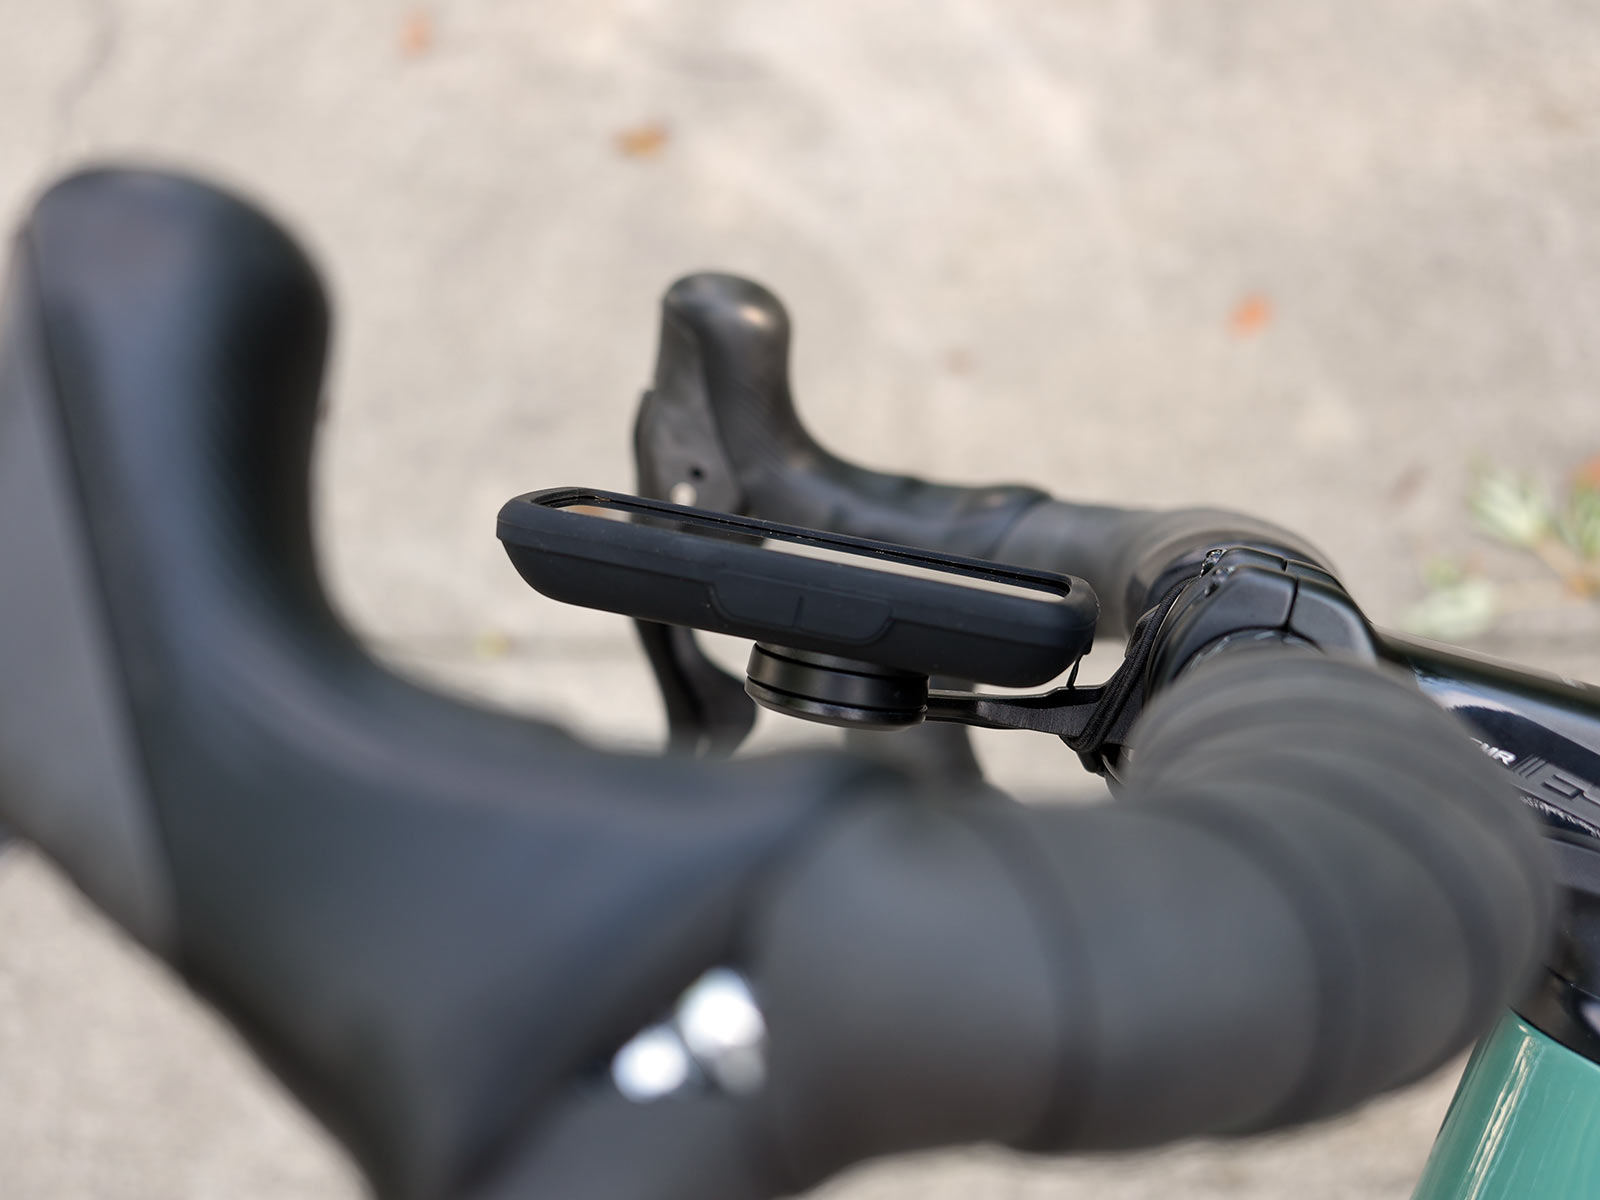 Bryton S800 cycling computer brings voice-to-text group chatting,  navigation & more! - Bikerumor